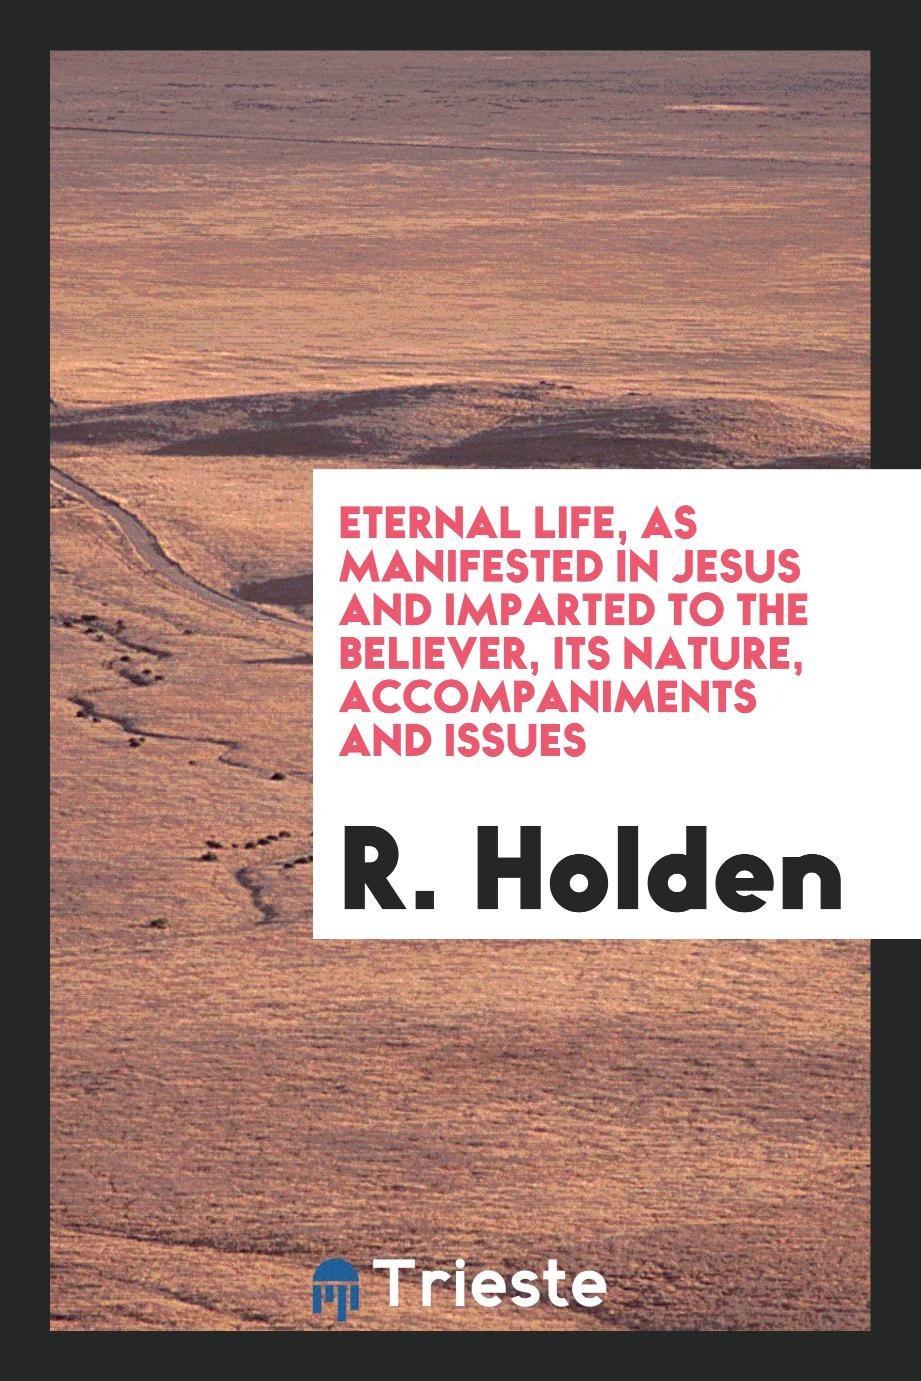 Eternal life, as manifested in Jesus and imparted to the believer, its Nature, Accompaniments and issues